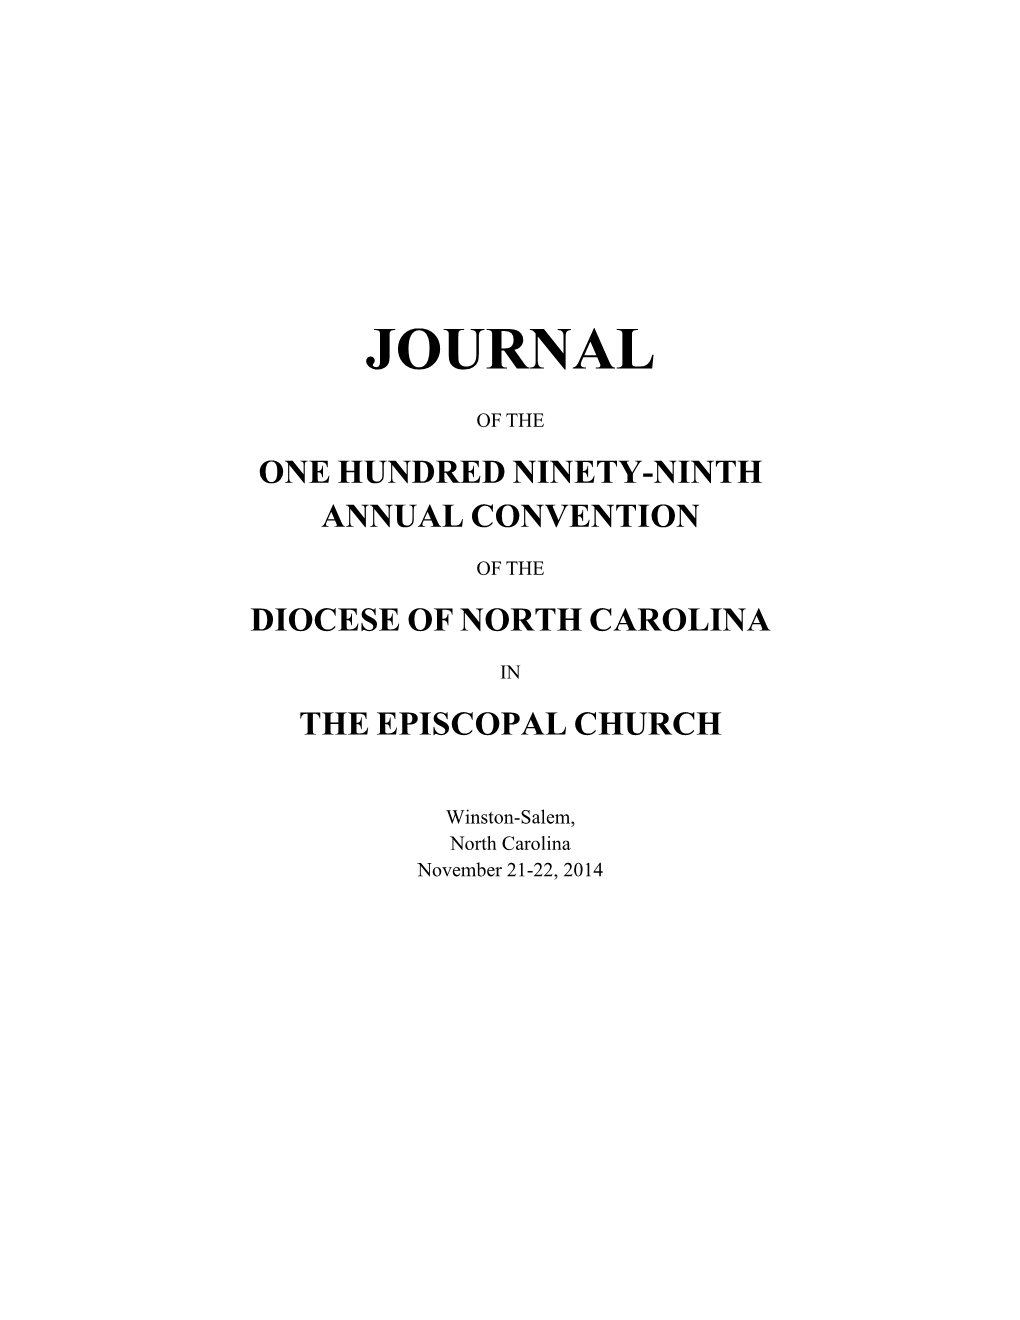 The November 2014 Journal of Convention